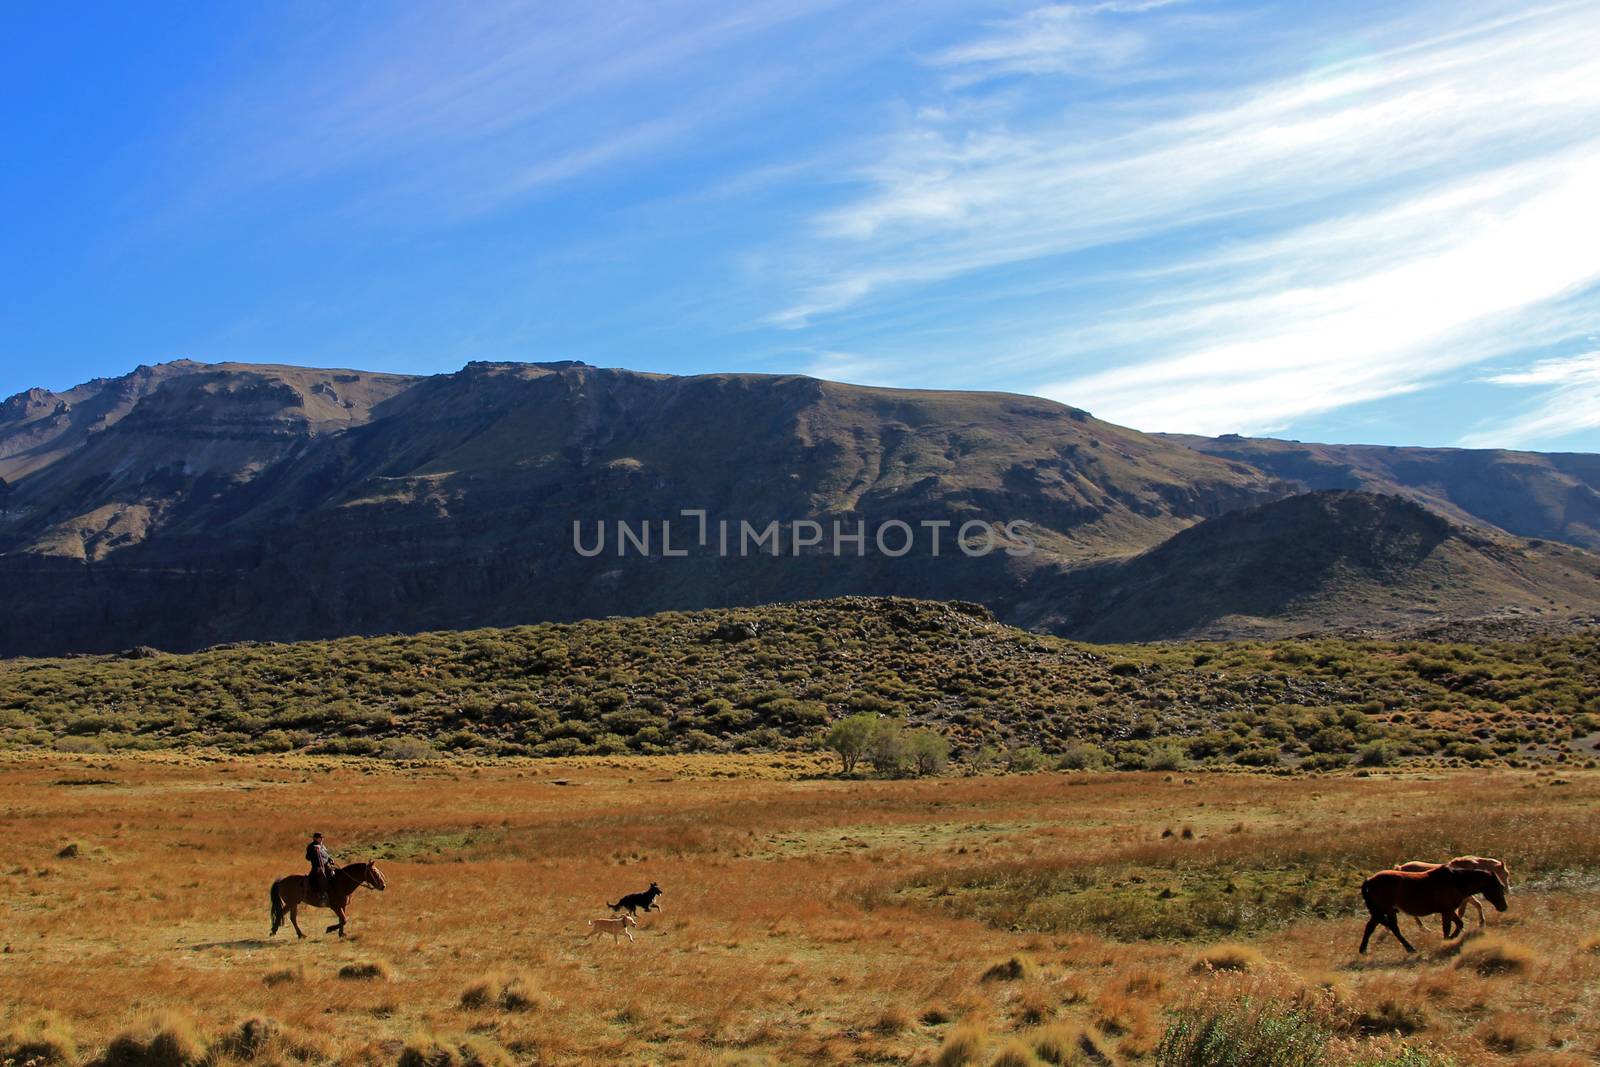 Gauchos and herd of cows, Patagonia, Argentina